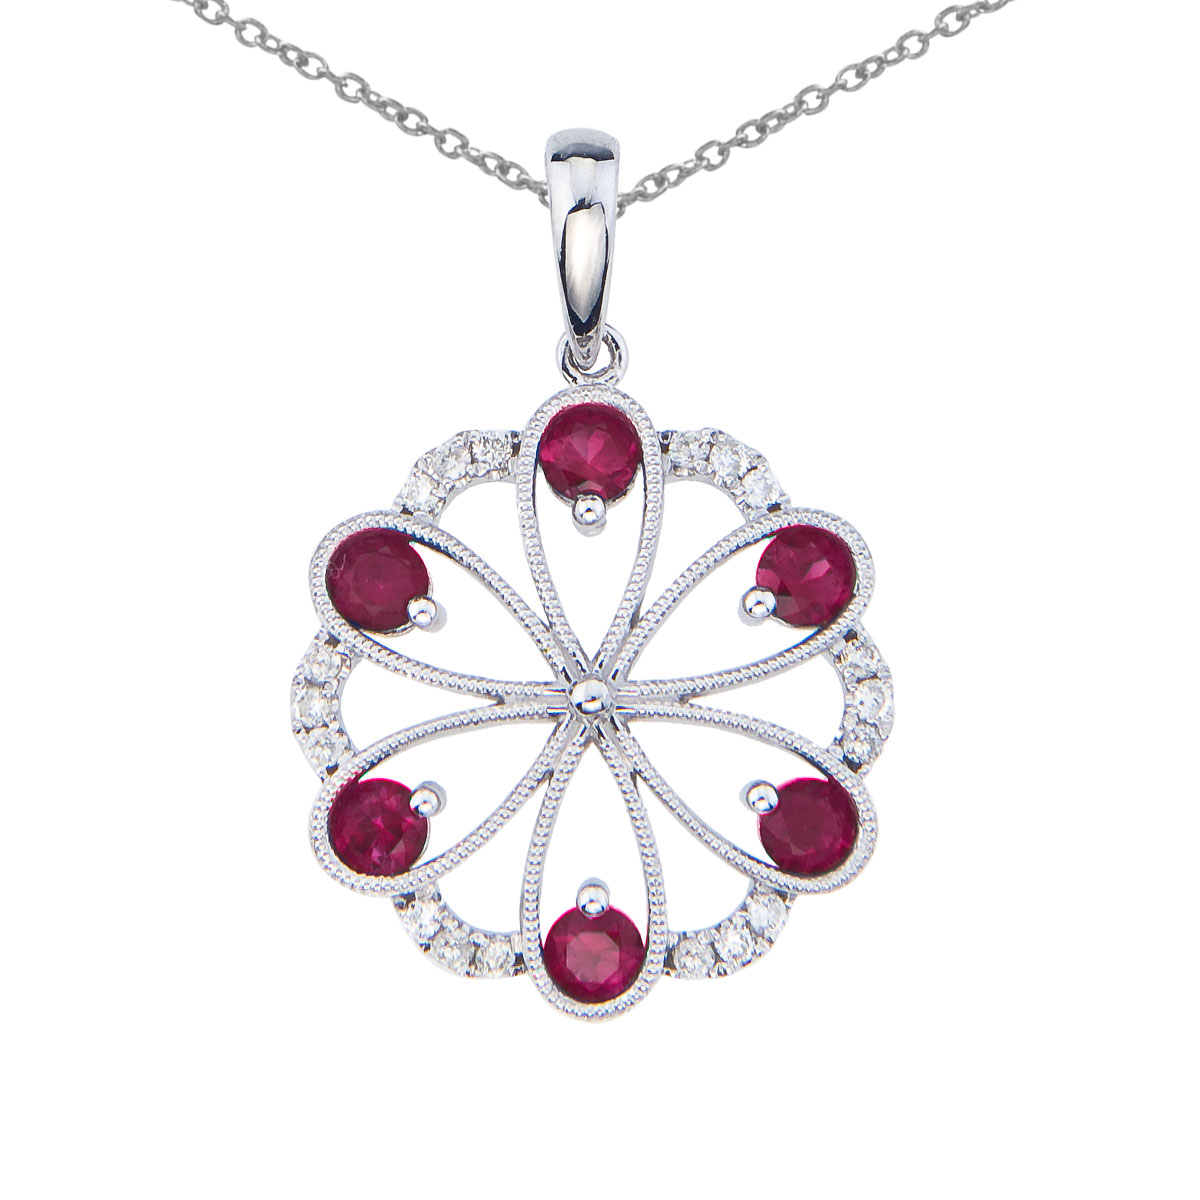 Beautiful floral pendant set in 14k white gold with 6 dazzling rubies and .14 total carats of bri...